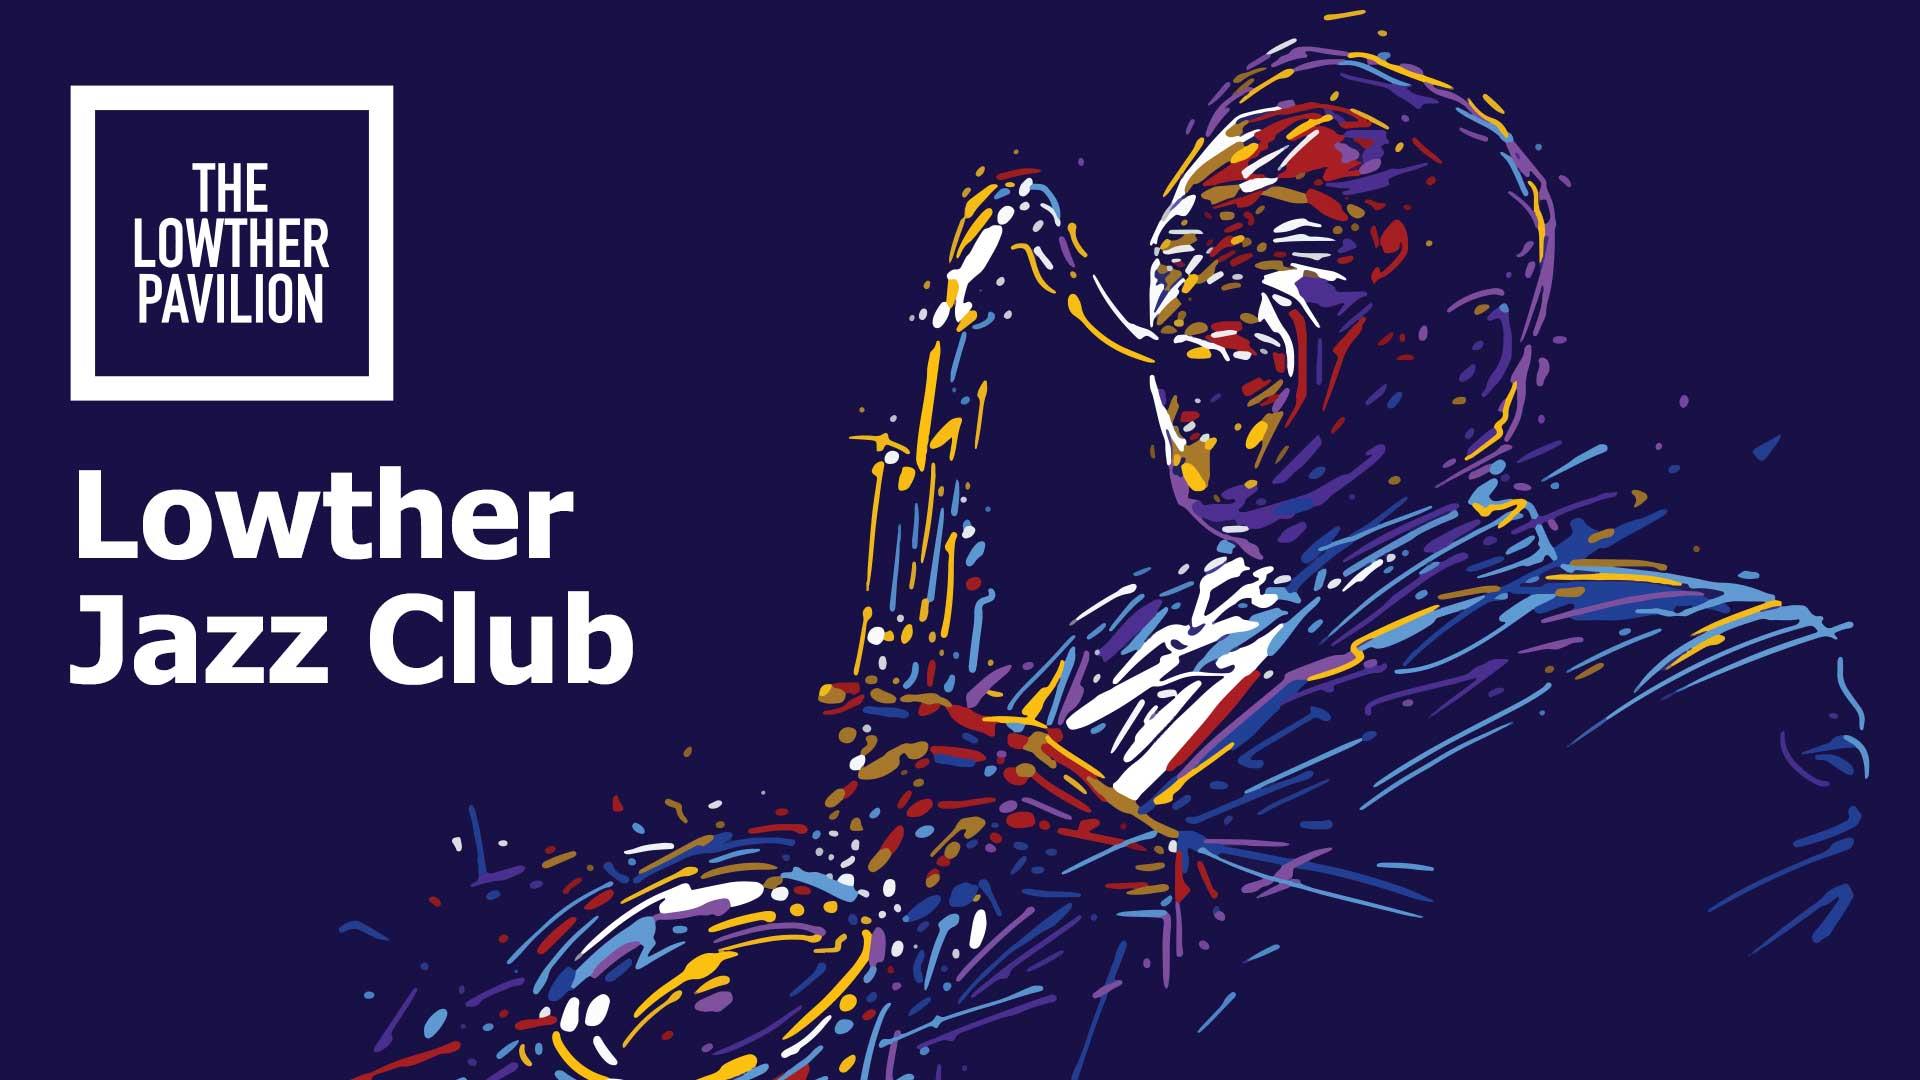 Lowther Jazz Club – June 2022 - Lowther Pavilion